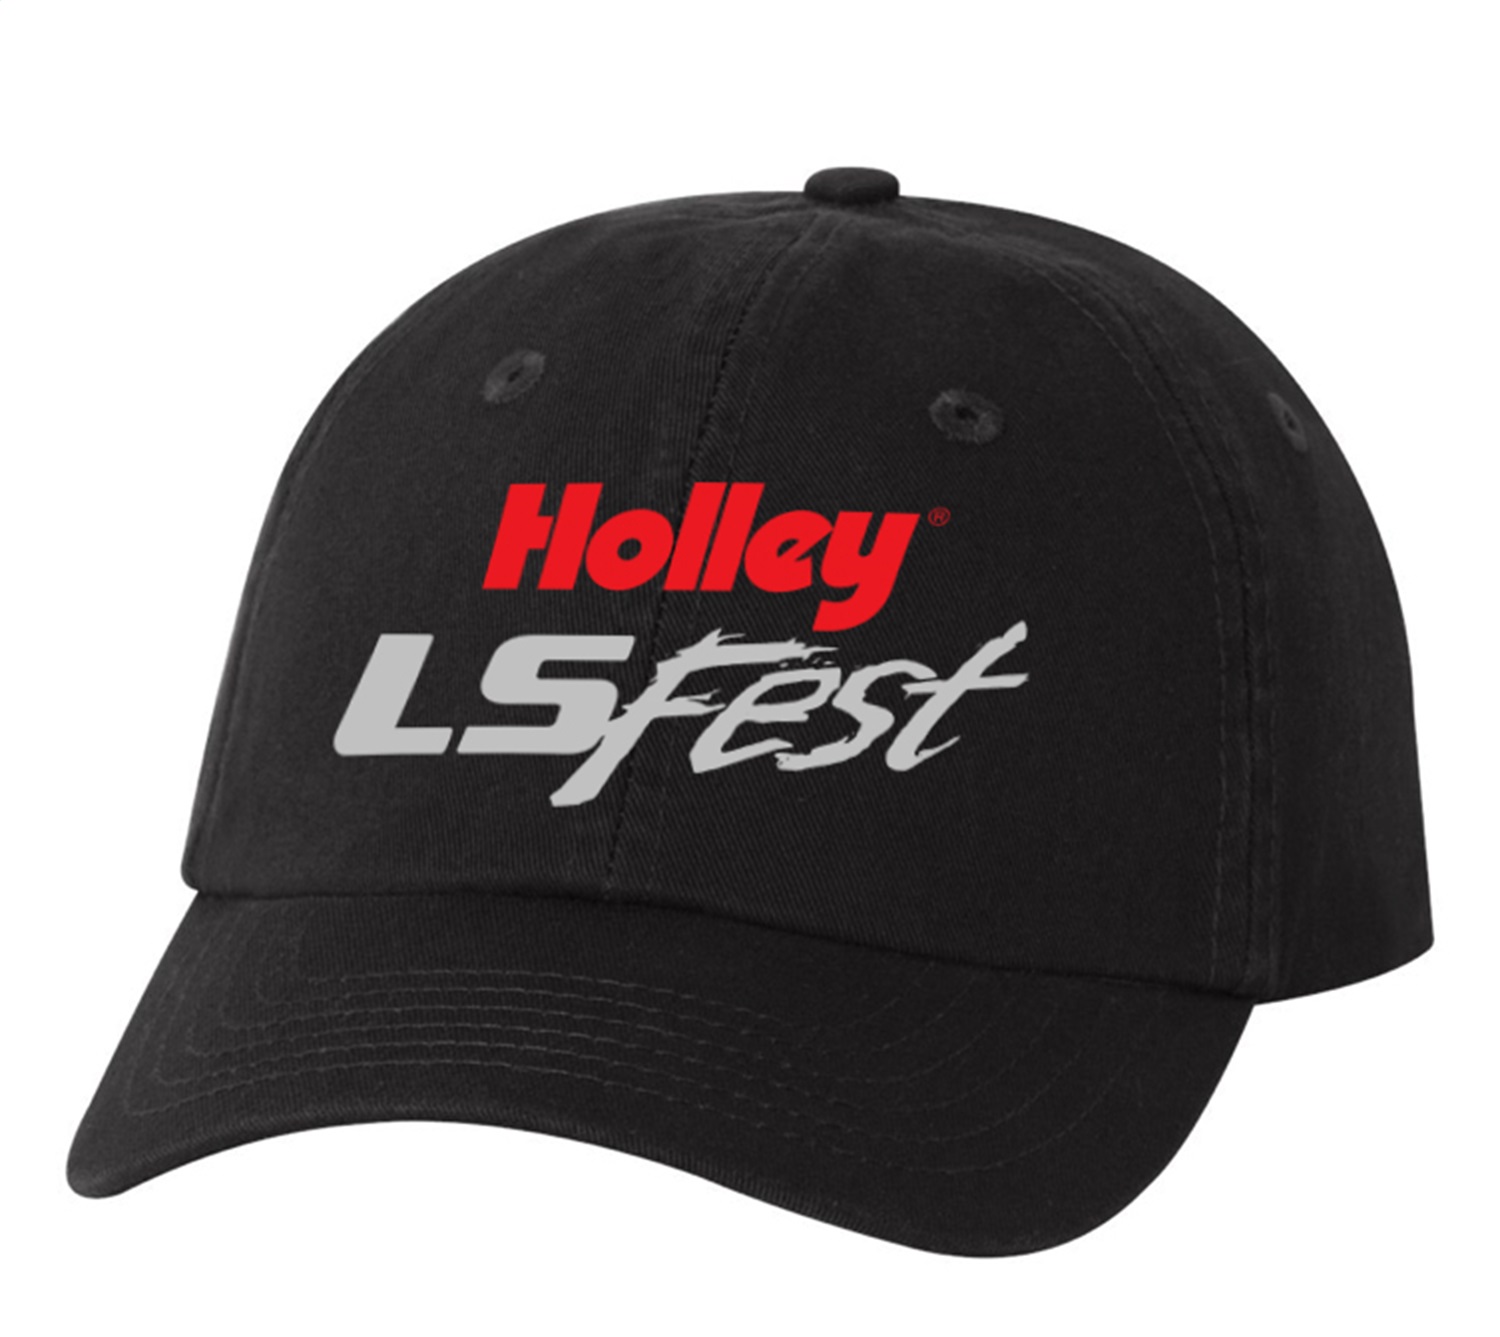 HOLLEY LS FEST YOUTH HAT